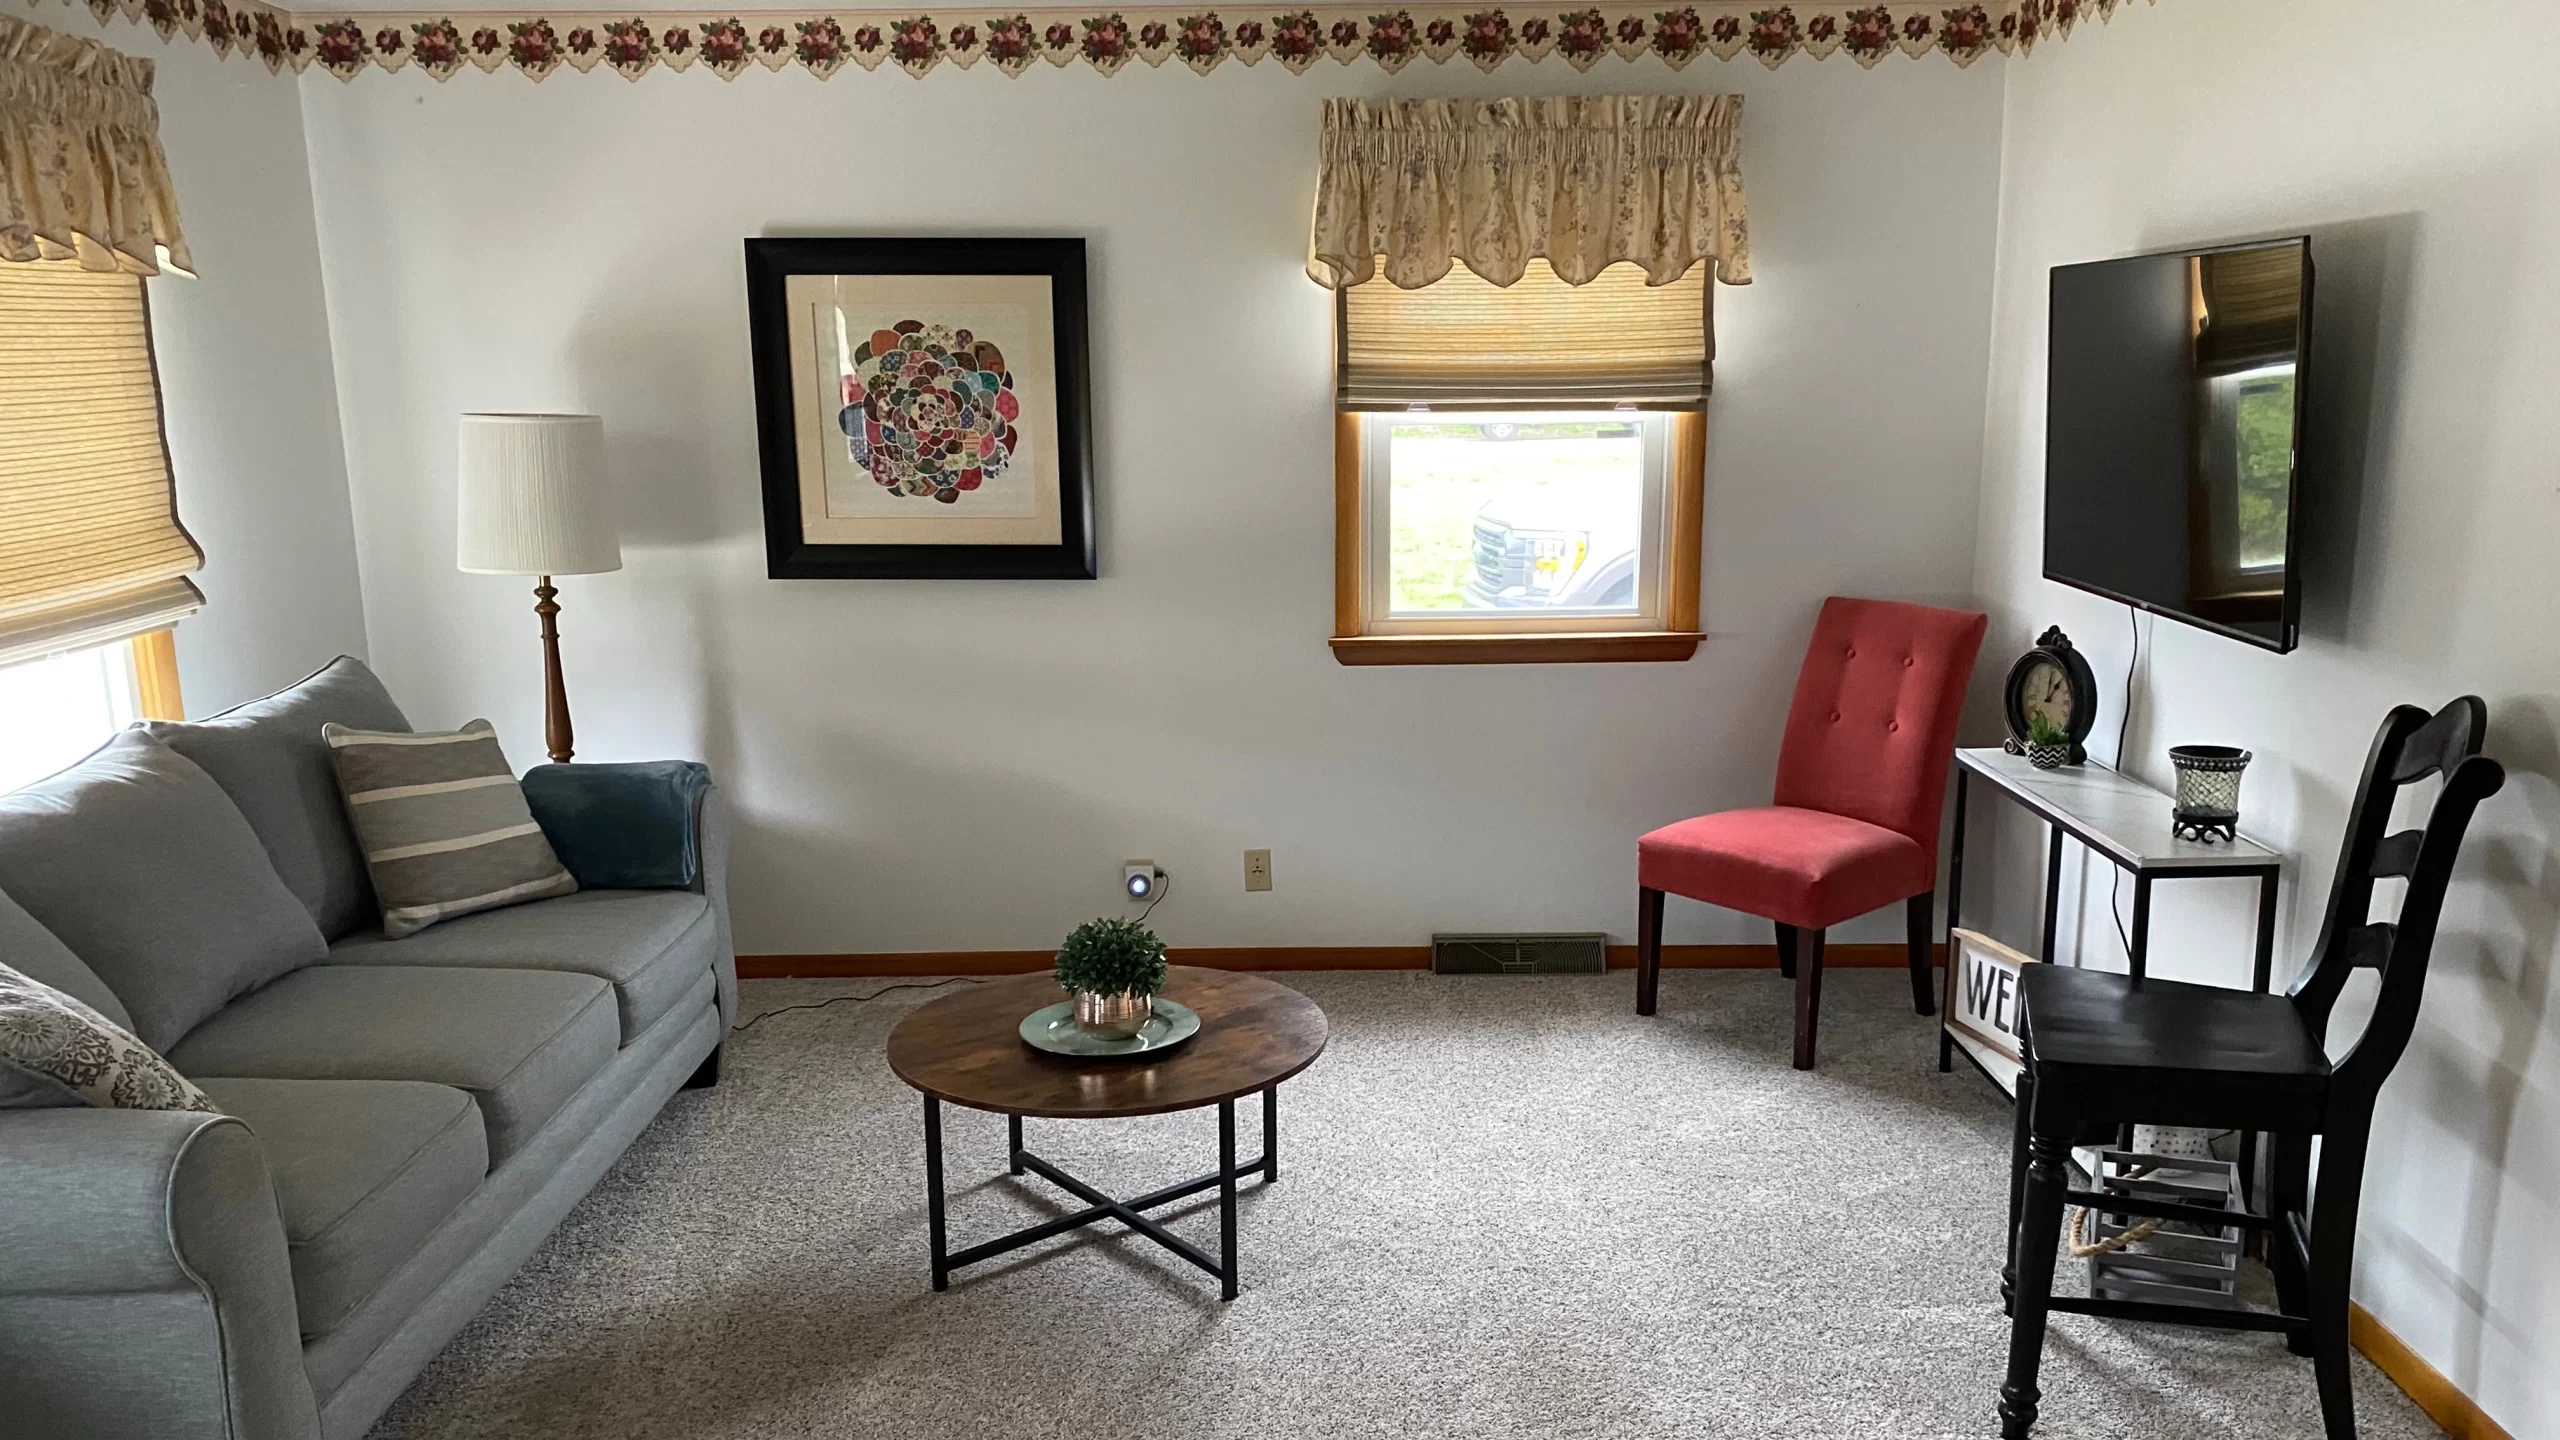 a grey couch, red chair and updated living room